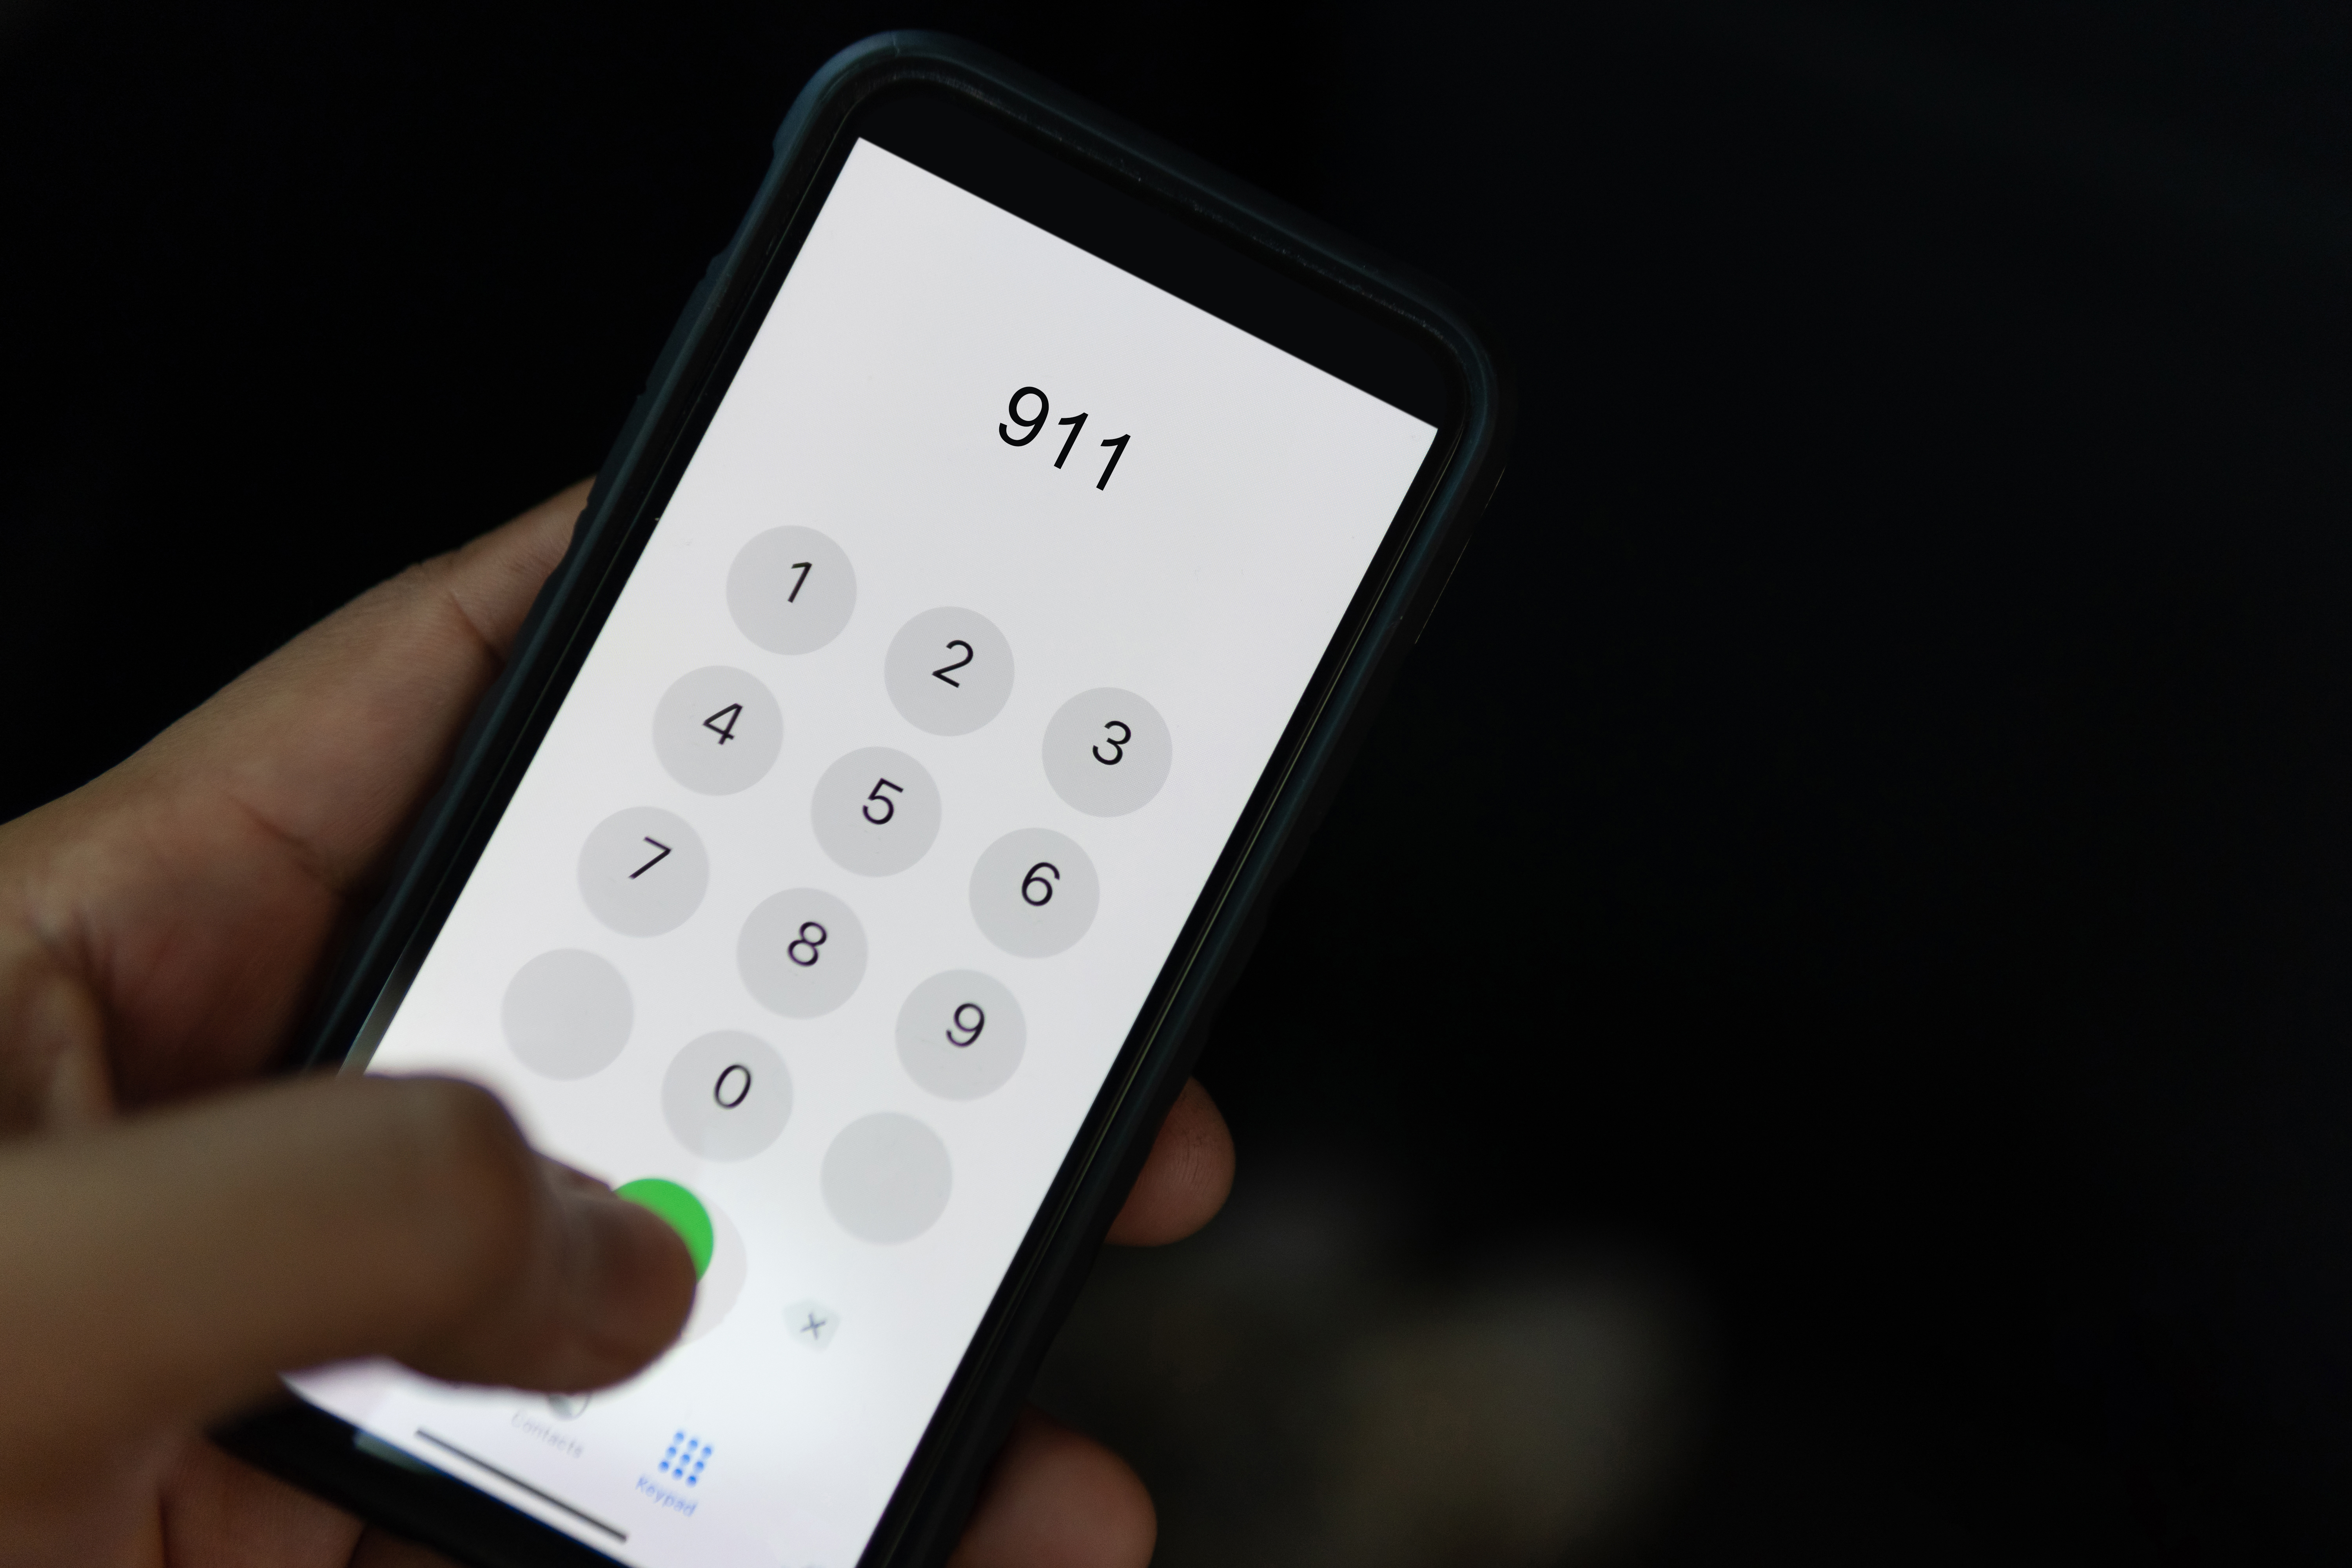 A person dialling 911 | Source: Shutterstock